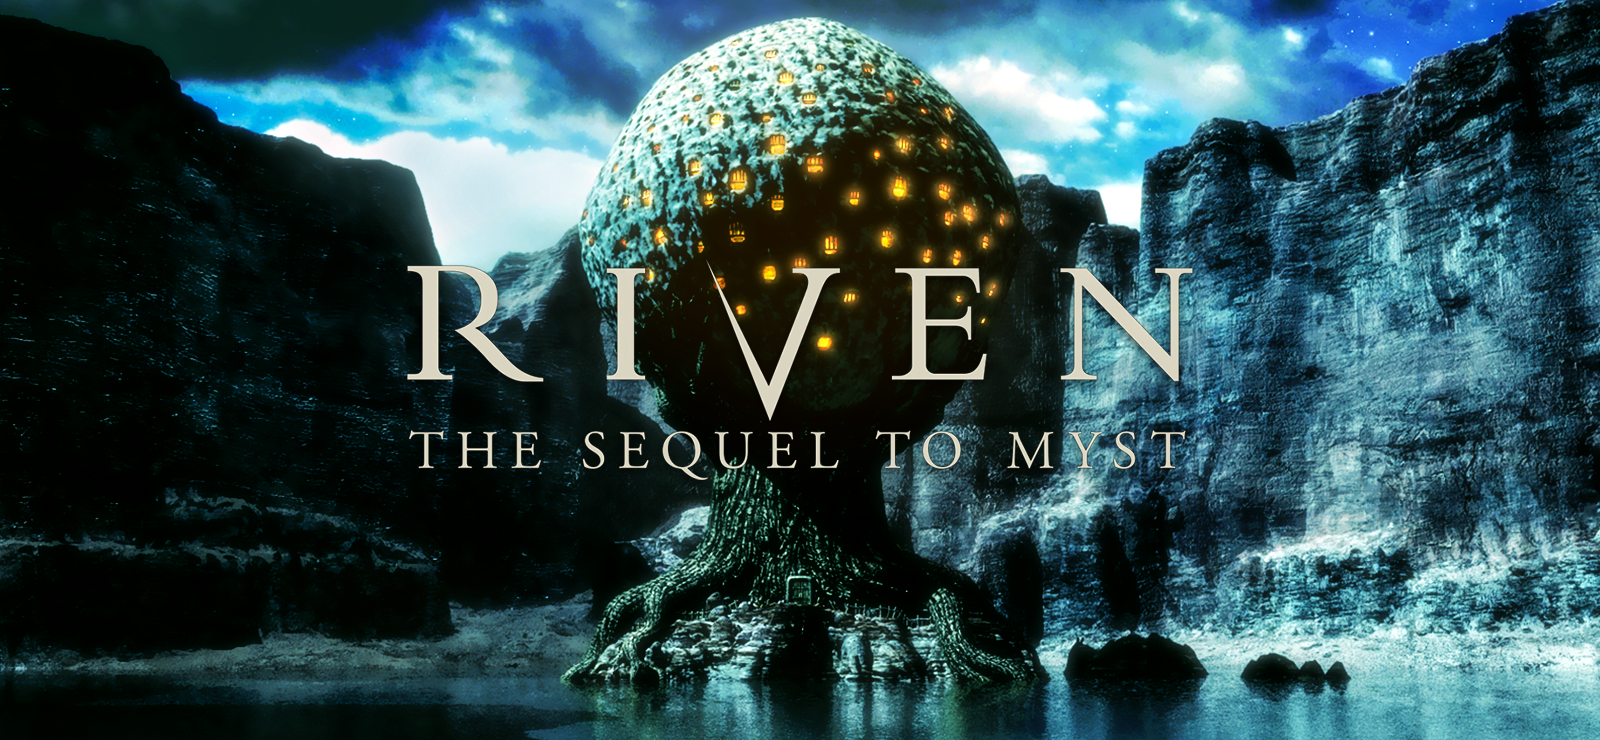 Riven: The Sequel To Myst